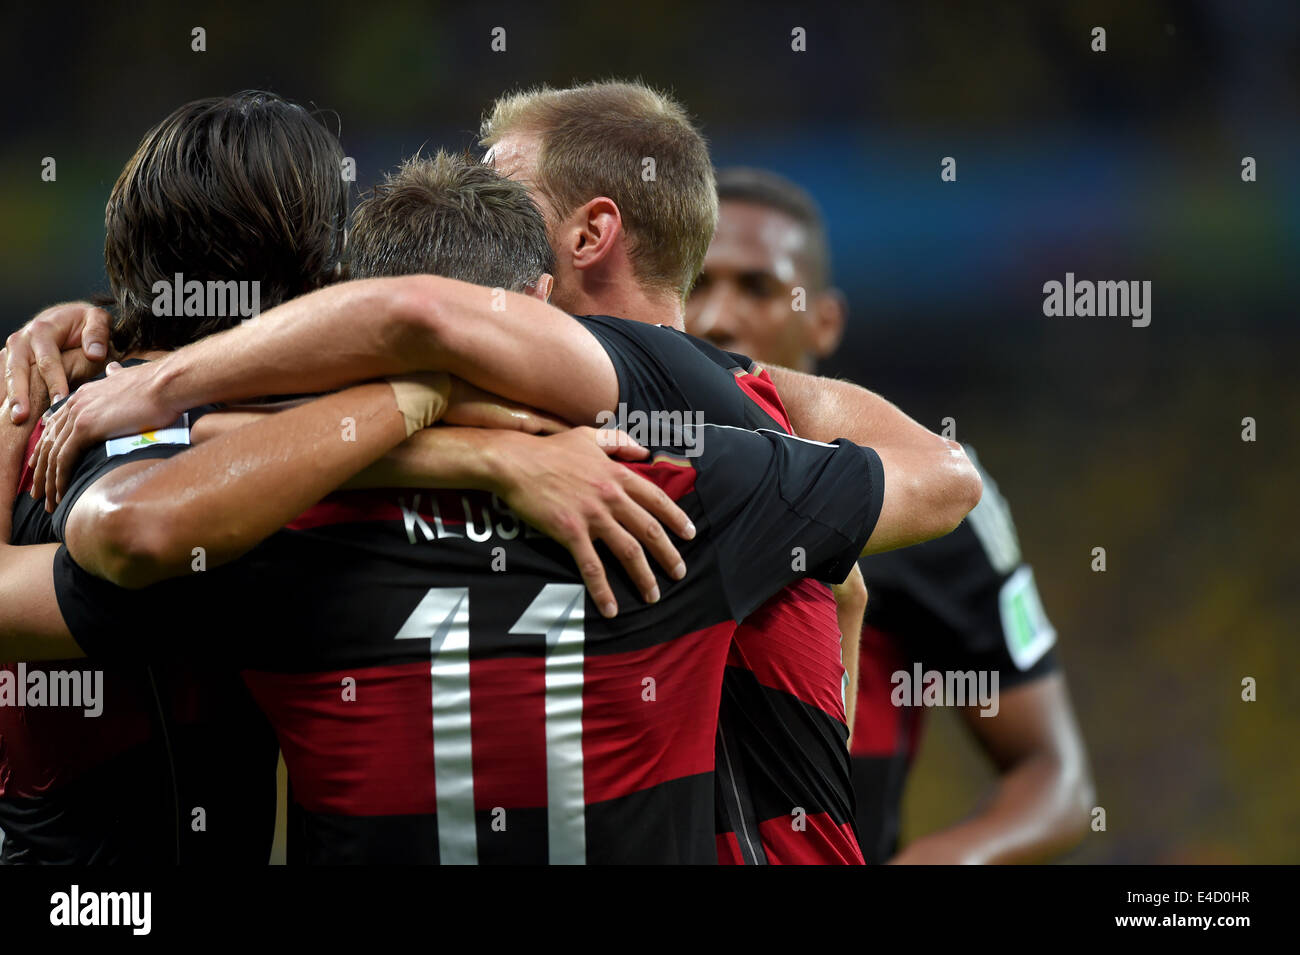 Belo Horizonte, Brazil. 8th July, 2014. Miroslav Klose (GER) Football/Soccer : Miroslav Klose (11) of Germany celebrates with his teammates after Klose scoring his team's second goal during the FIFA World Cup 2014 semi-finals match between Brazil 1-7 Germany at Mineirao stadium in Belo Horizonte, Brazil . Credit:  FAR EAST PRESS/AFLO/Alamy Live News Stock Photo